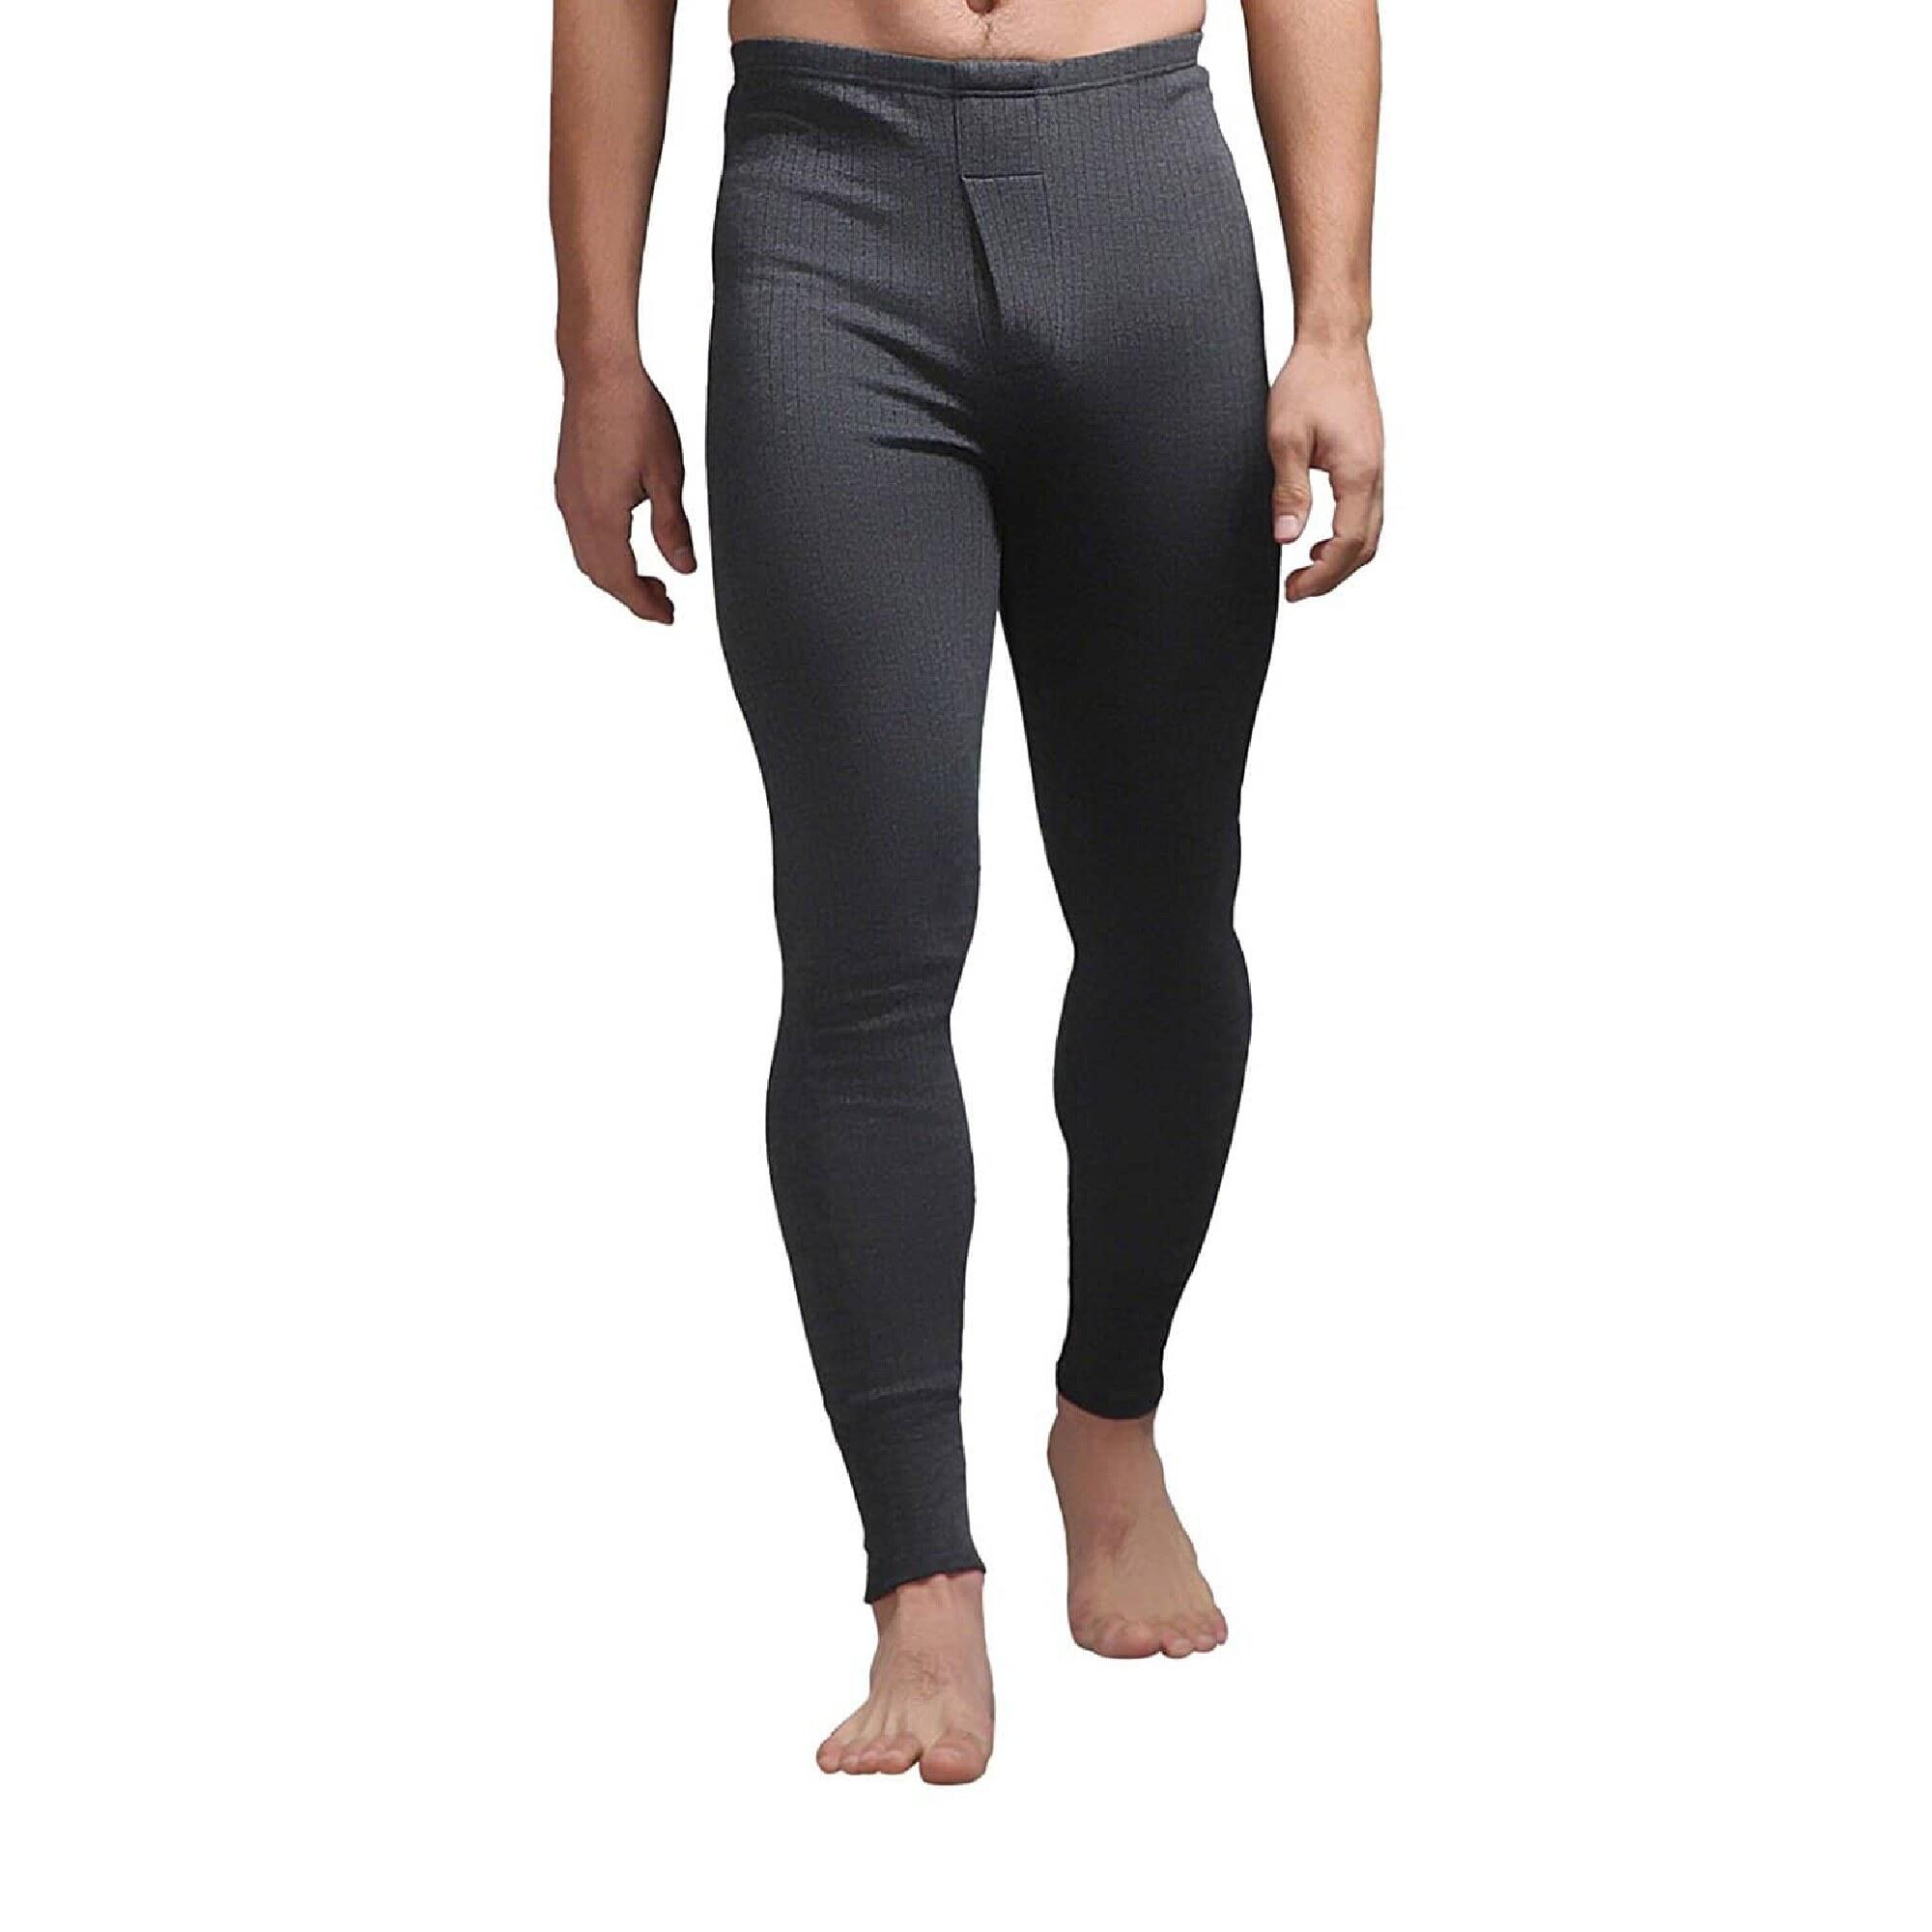 Mens Womens Heated Pants Thermal Underwear Bottoms Long Johns